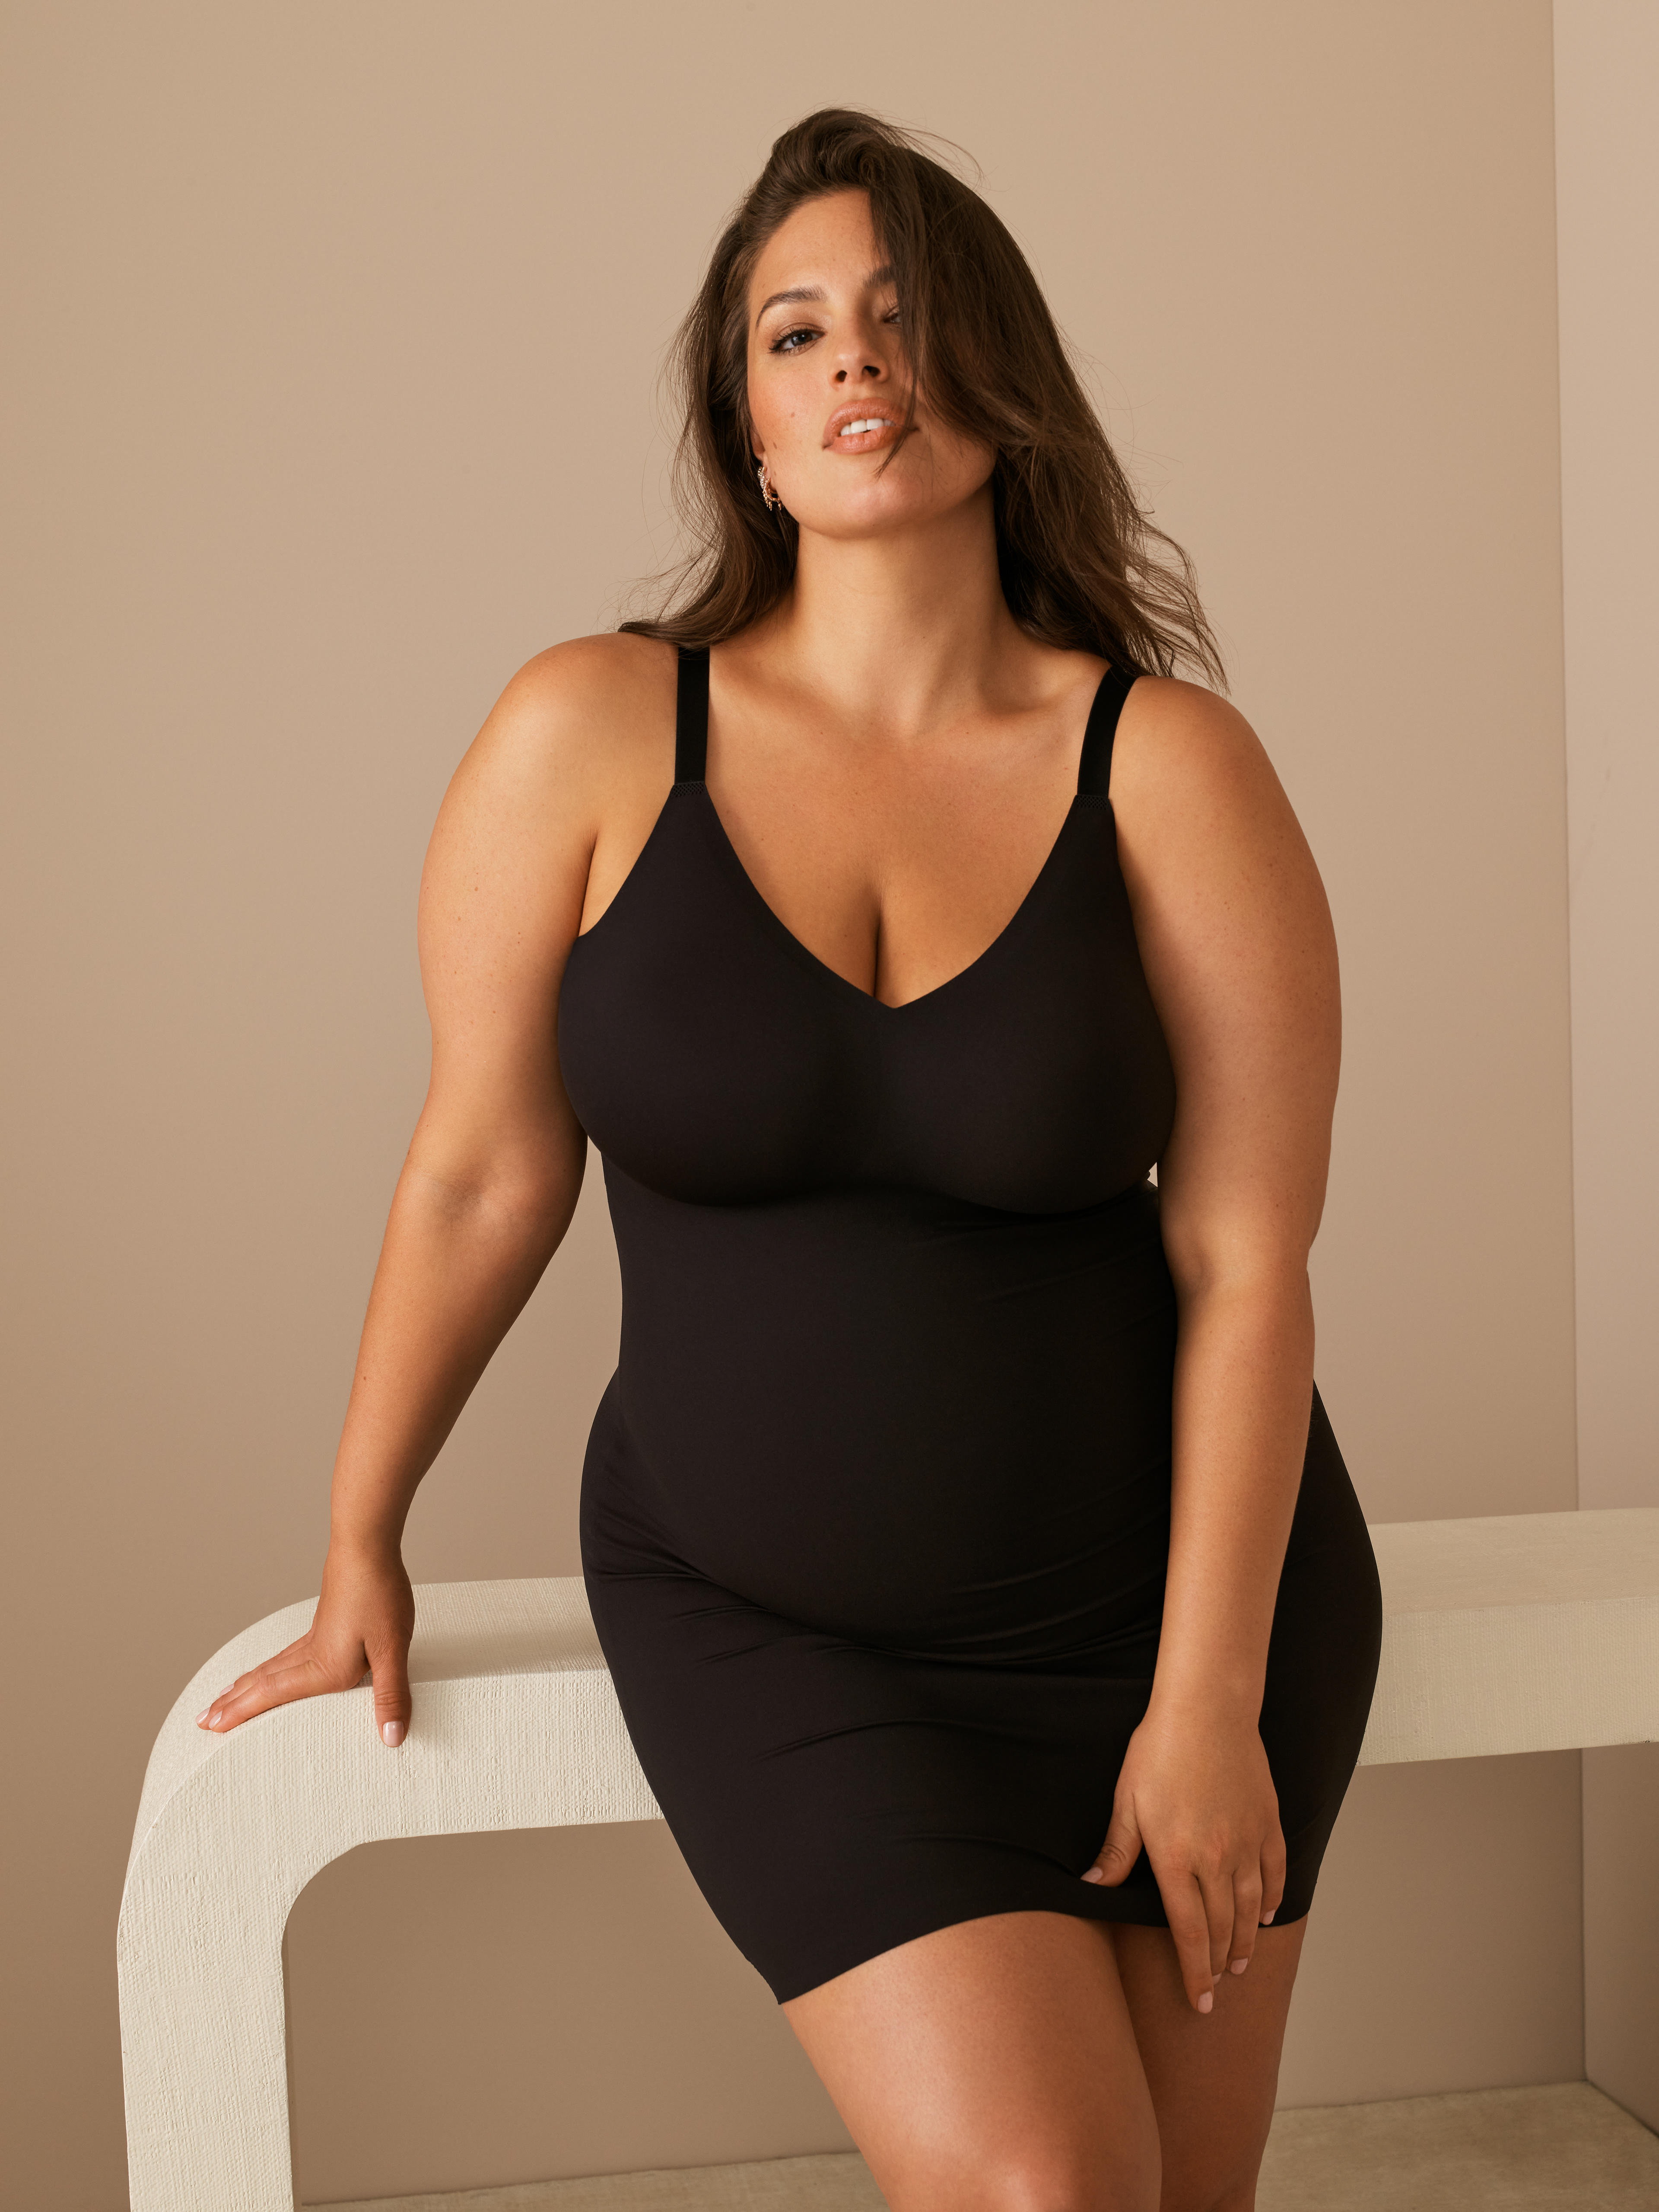 Ashley Graham x Knix Collection, 2022